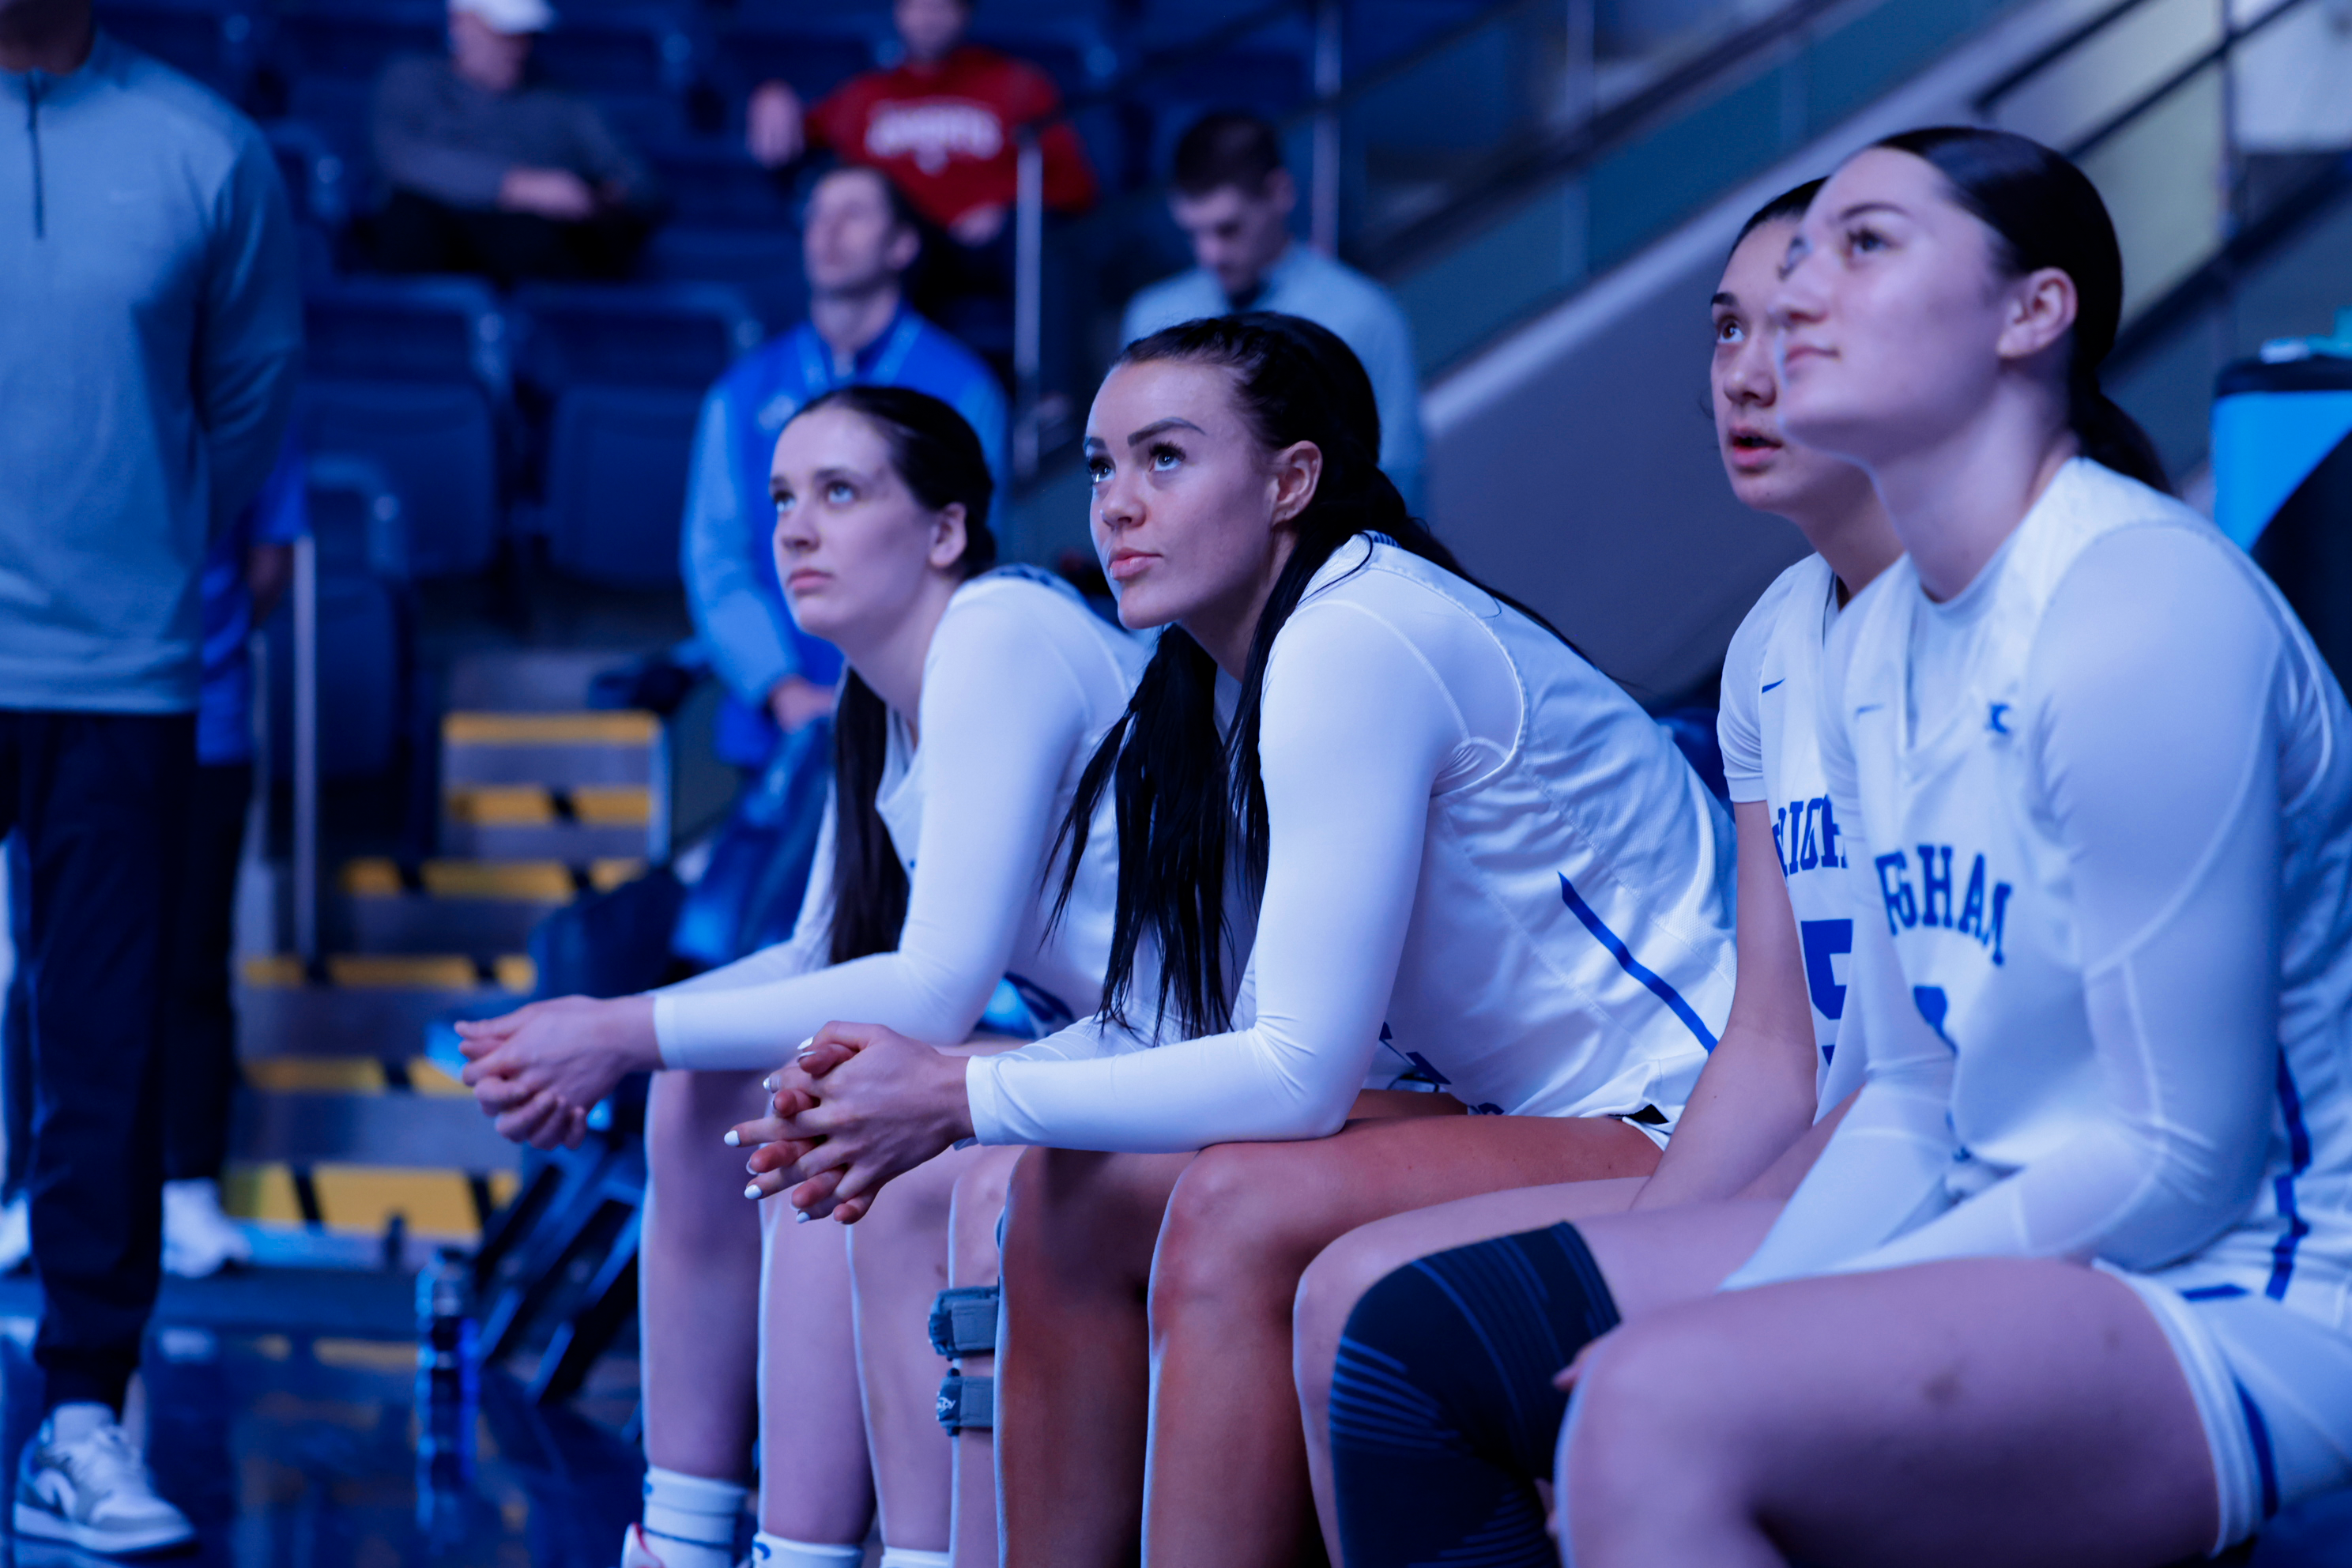 Lauren Gustin prepares to enter the game before a game against Portland at the Marriott Center.